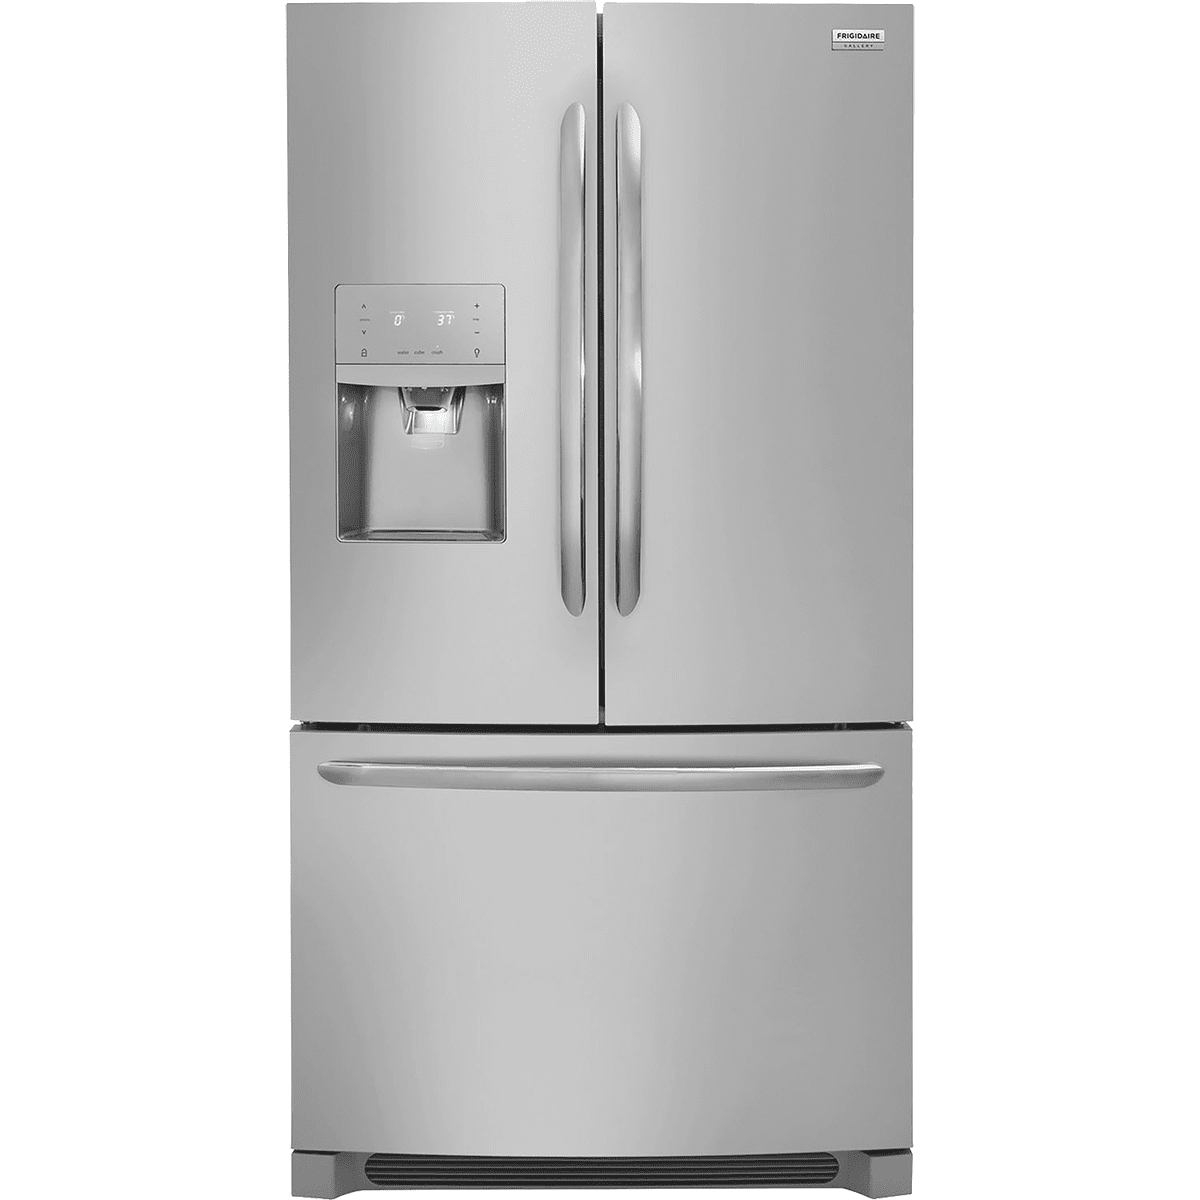 Frigidaire Gallery 26.8 Cu. Ft. Energy Star French Door Refrigerator - Smudge-Proof Stainless Steel